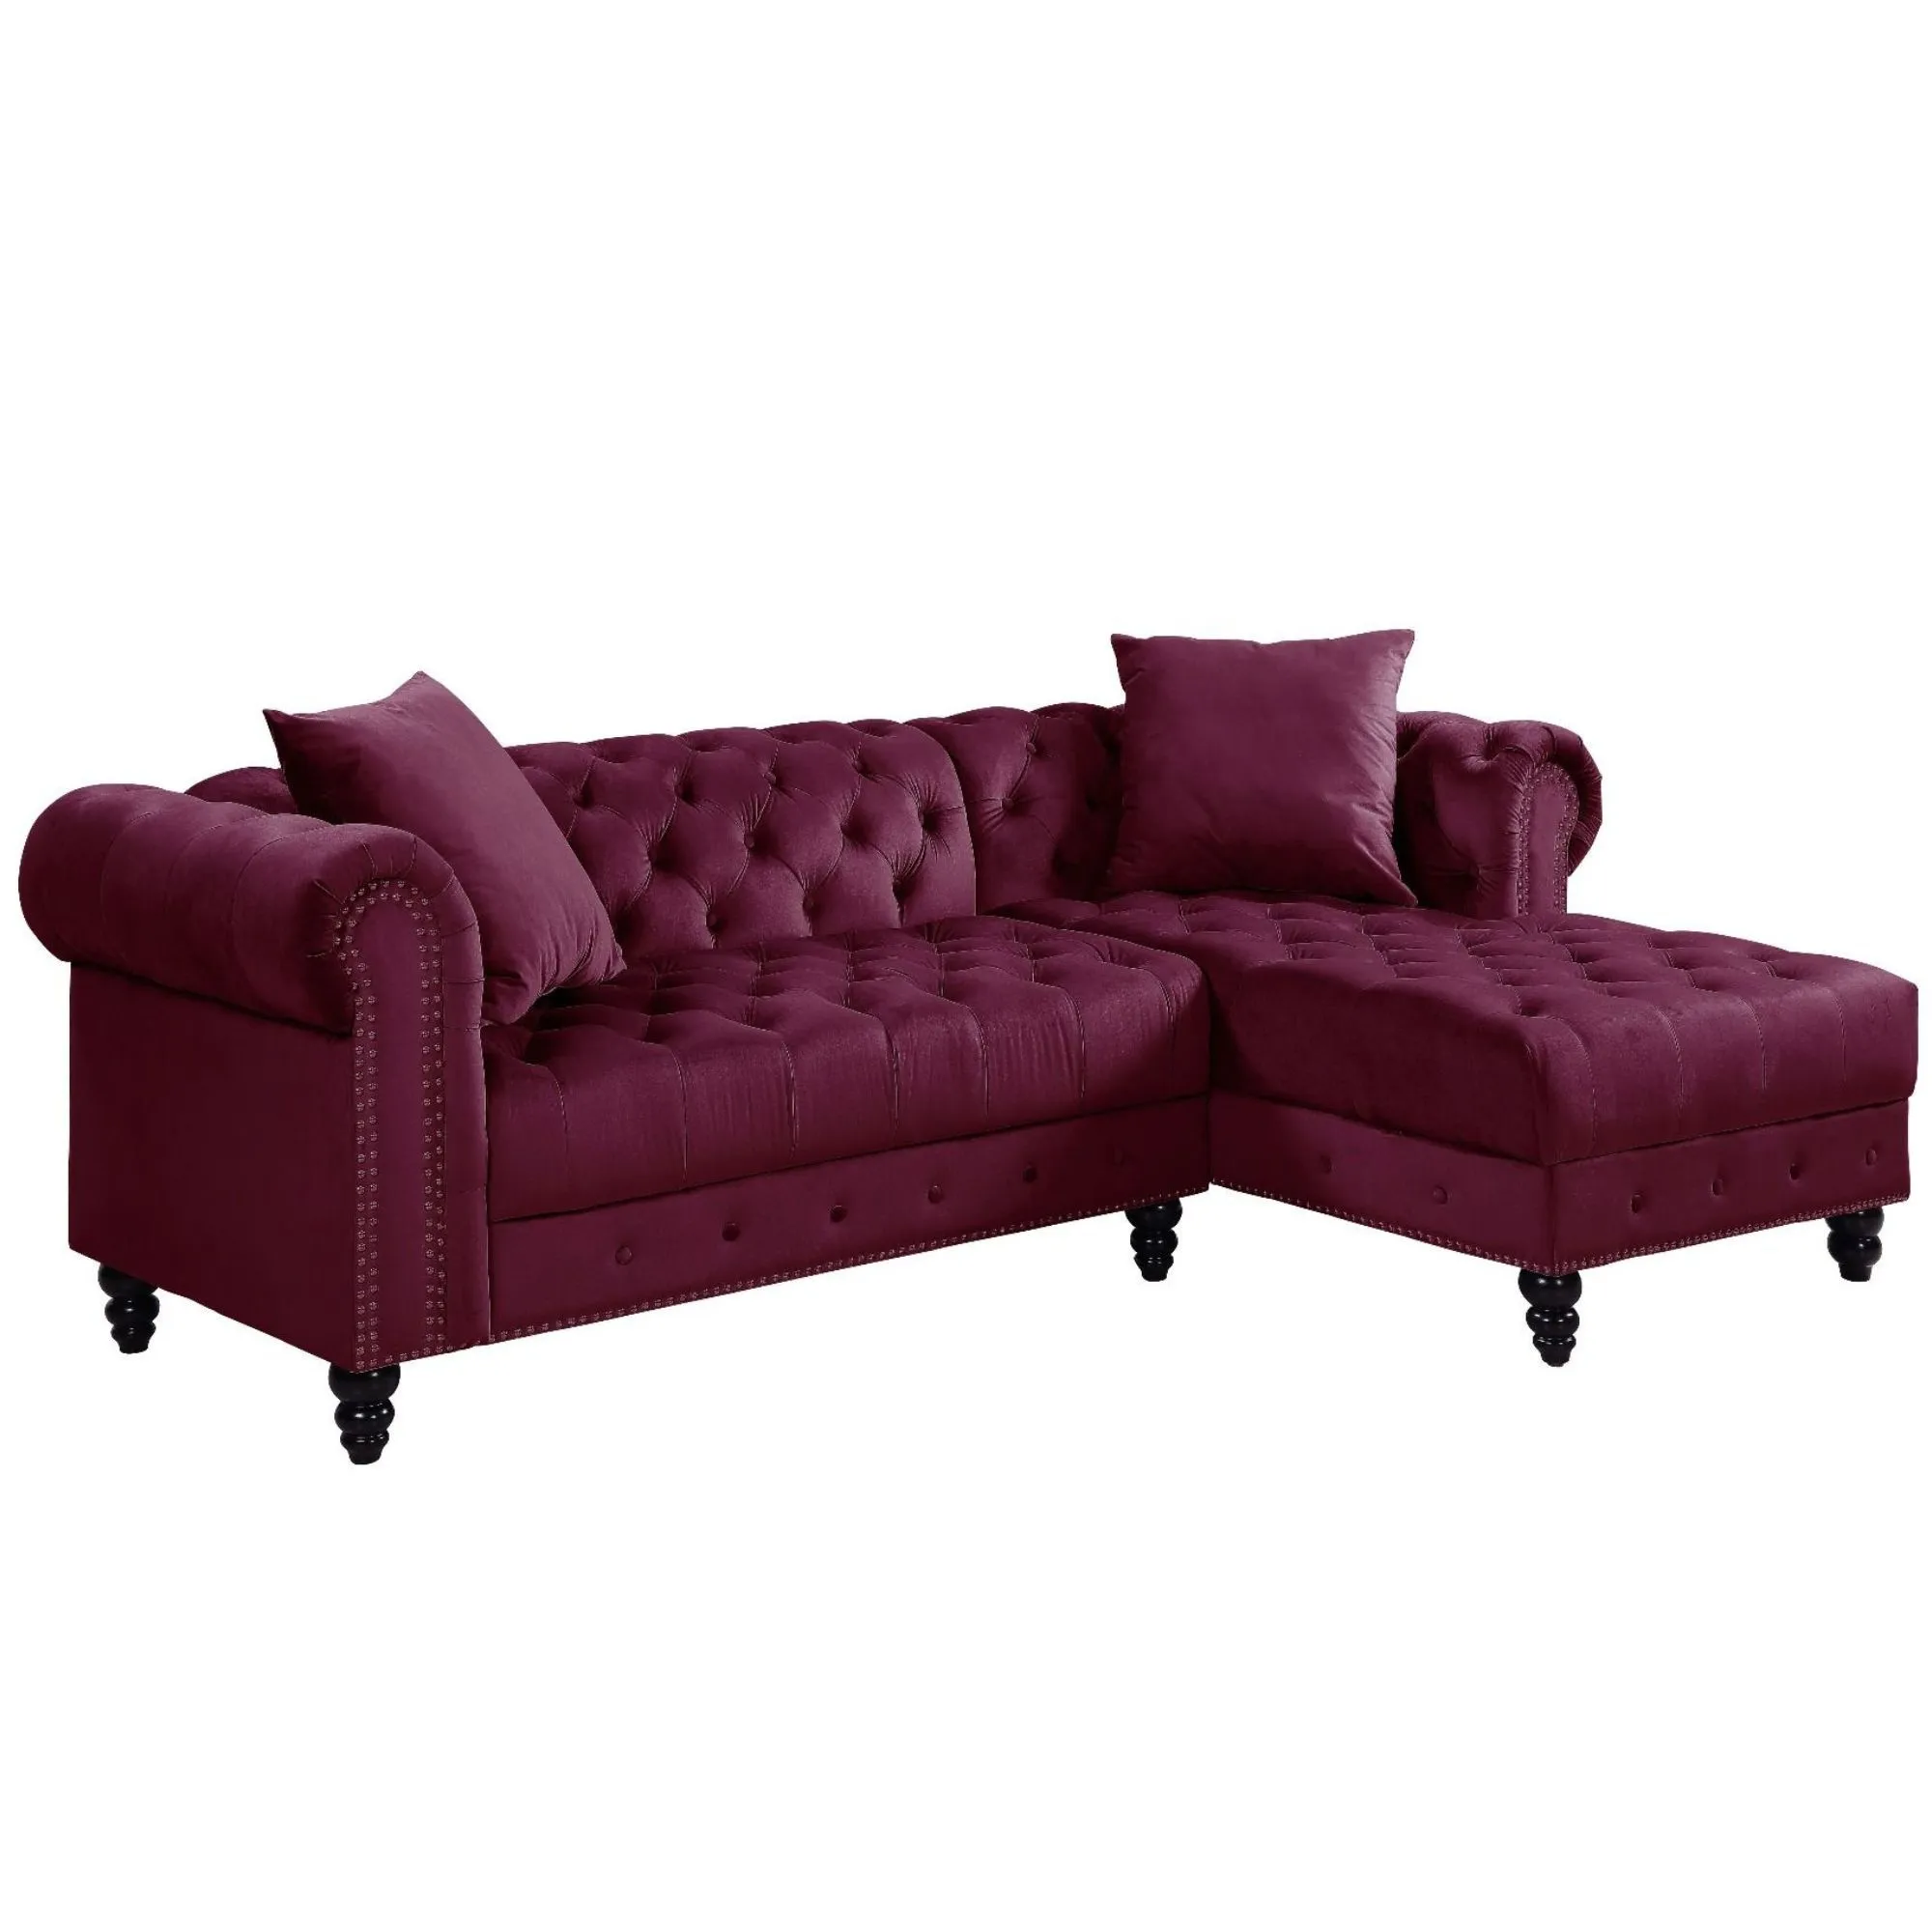 Sectional Sofa with 2 Pillows Velvet Sleek and Comfortable Seating for Your Living Space